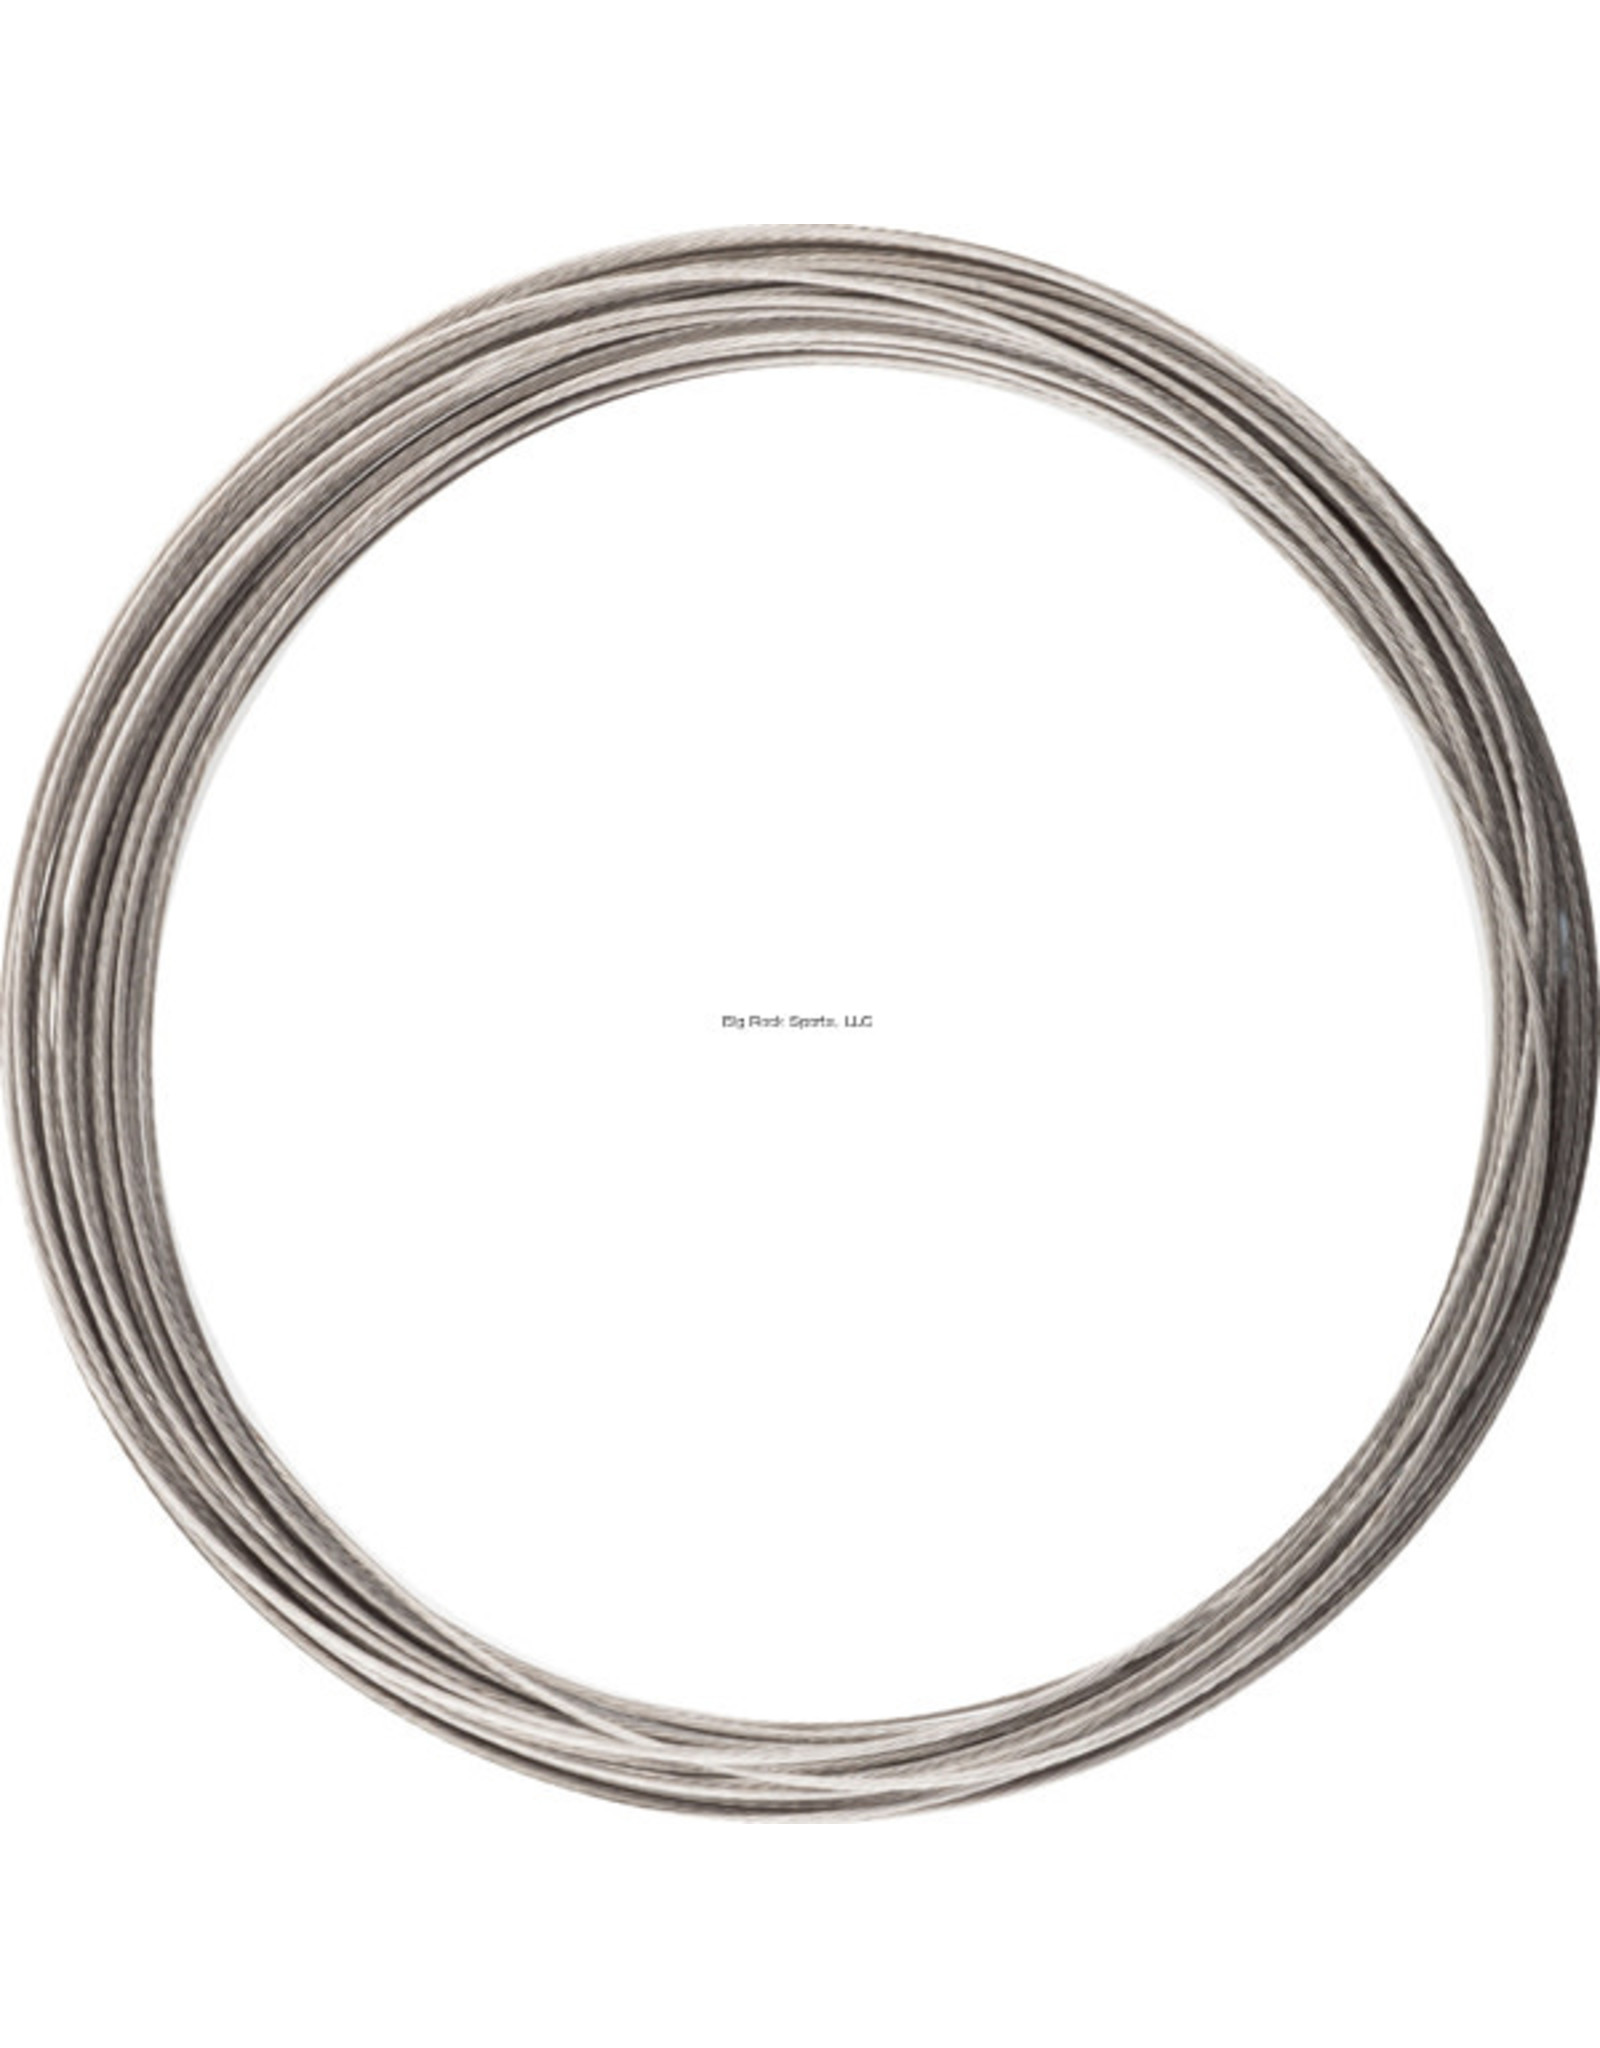 Danielson LDRWC30 Leader Wire 30' SS Coated 30 Lb (243427)